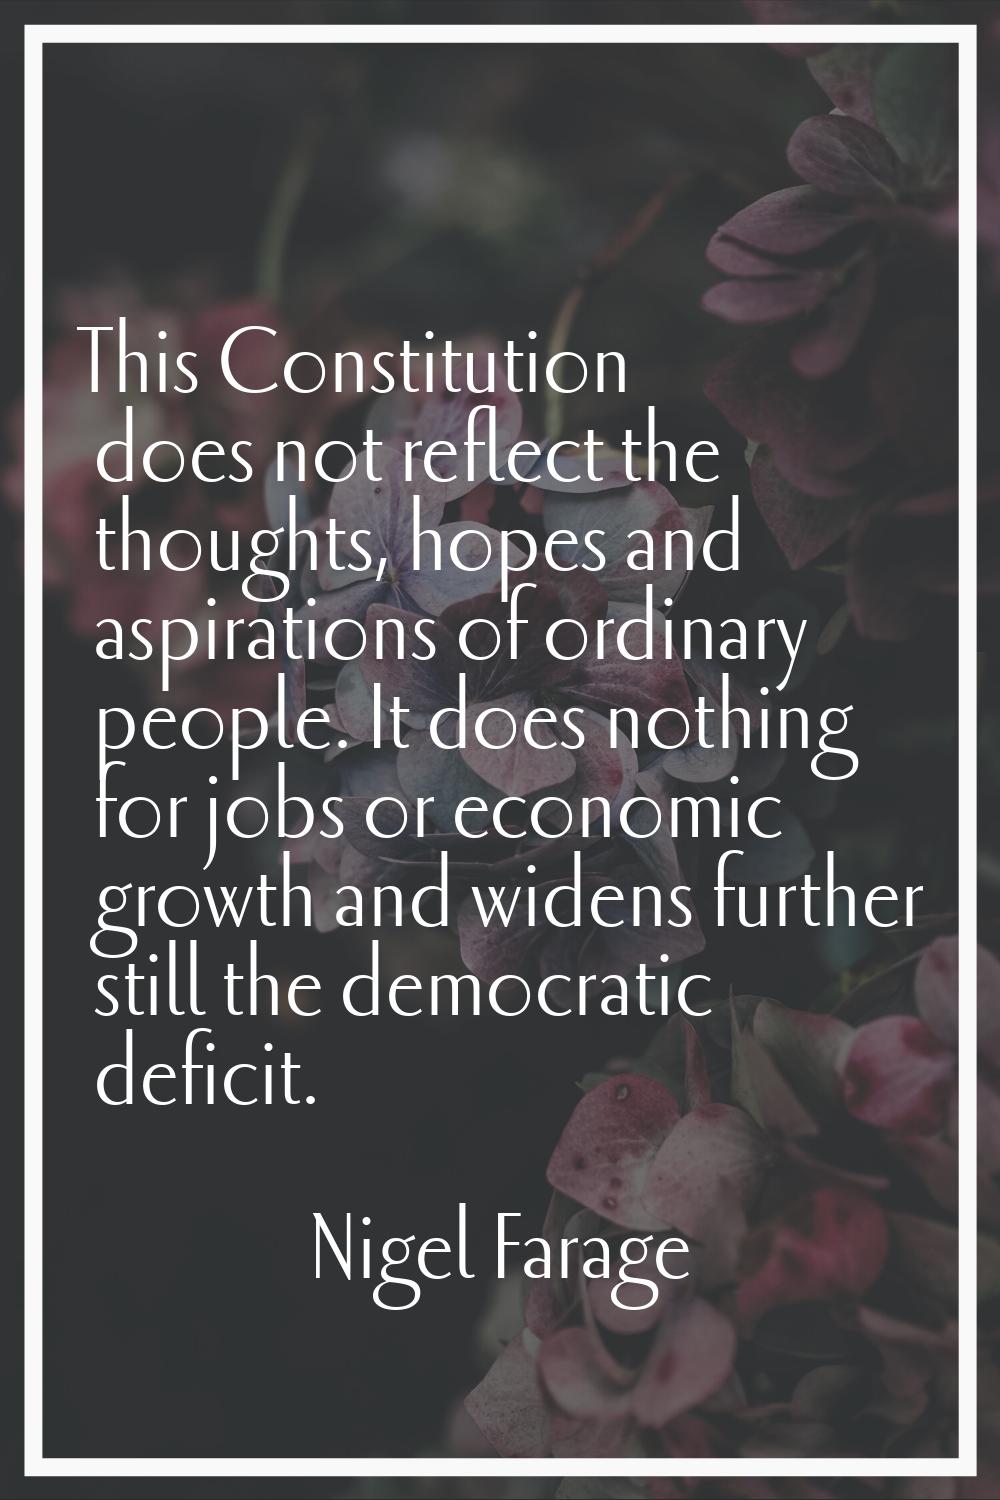 This Constitution does not reflect the thoughts, hopes and aspirations of ordinary people. It does 